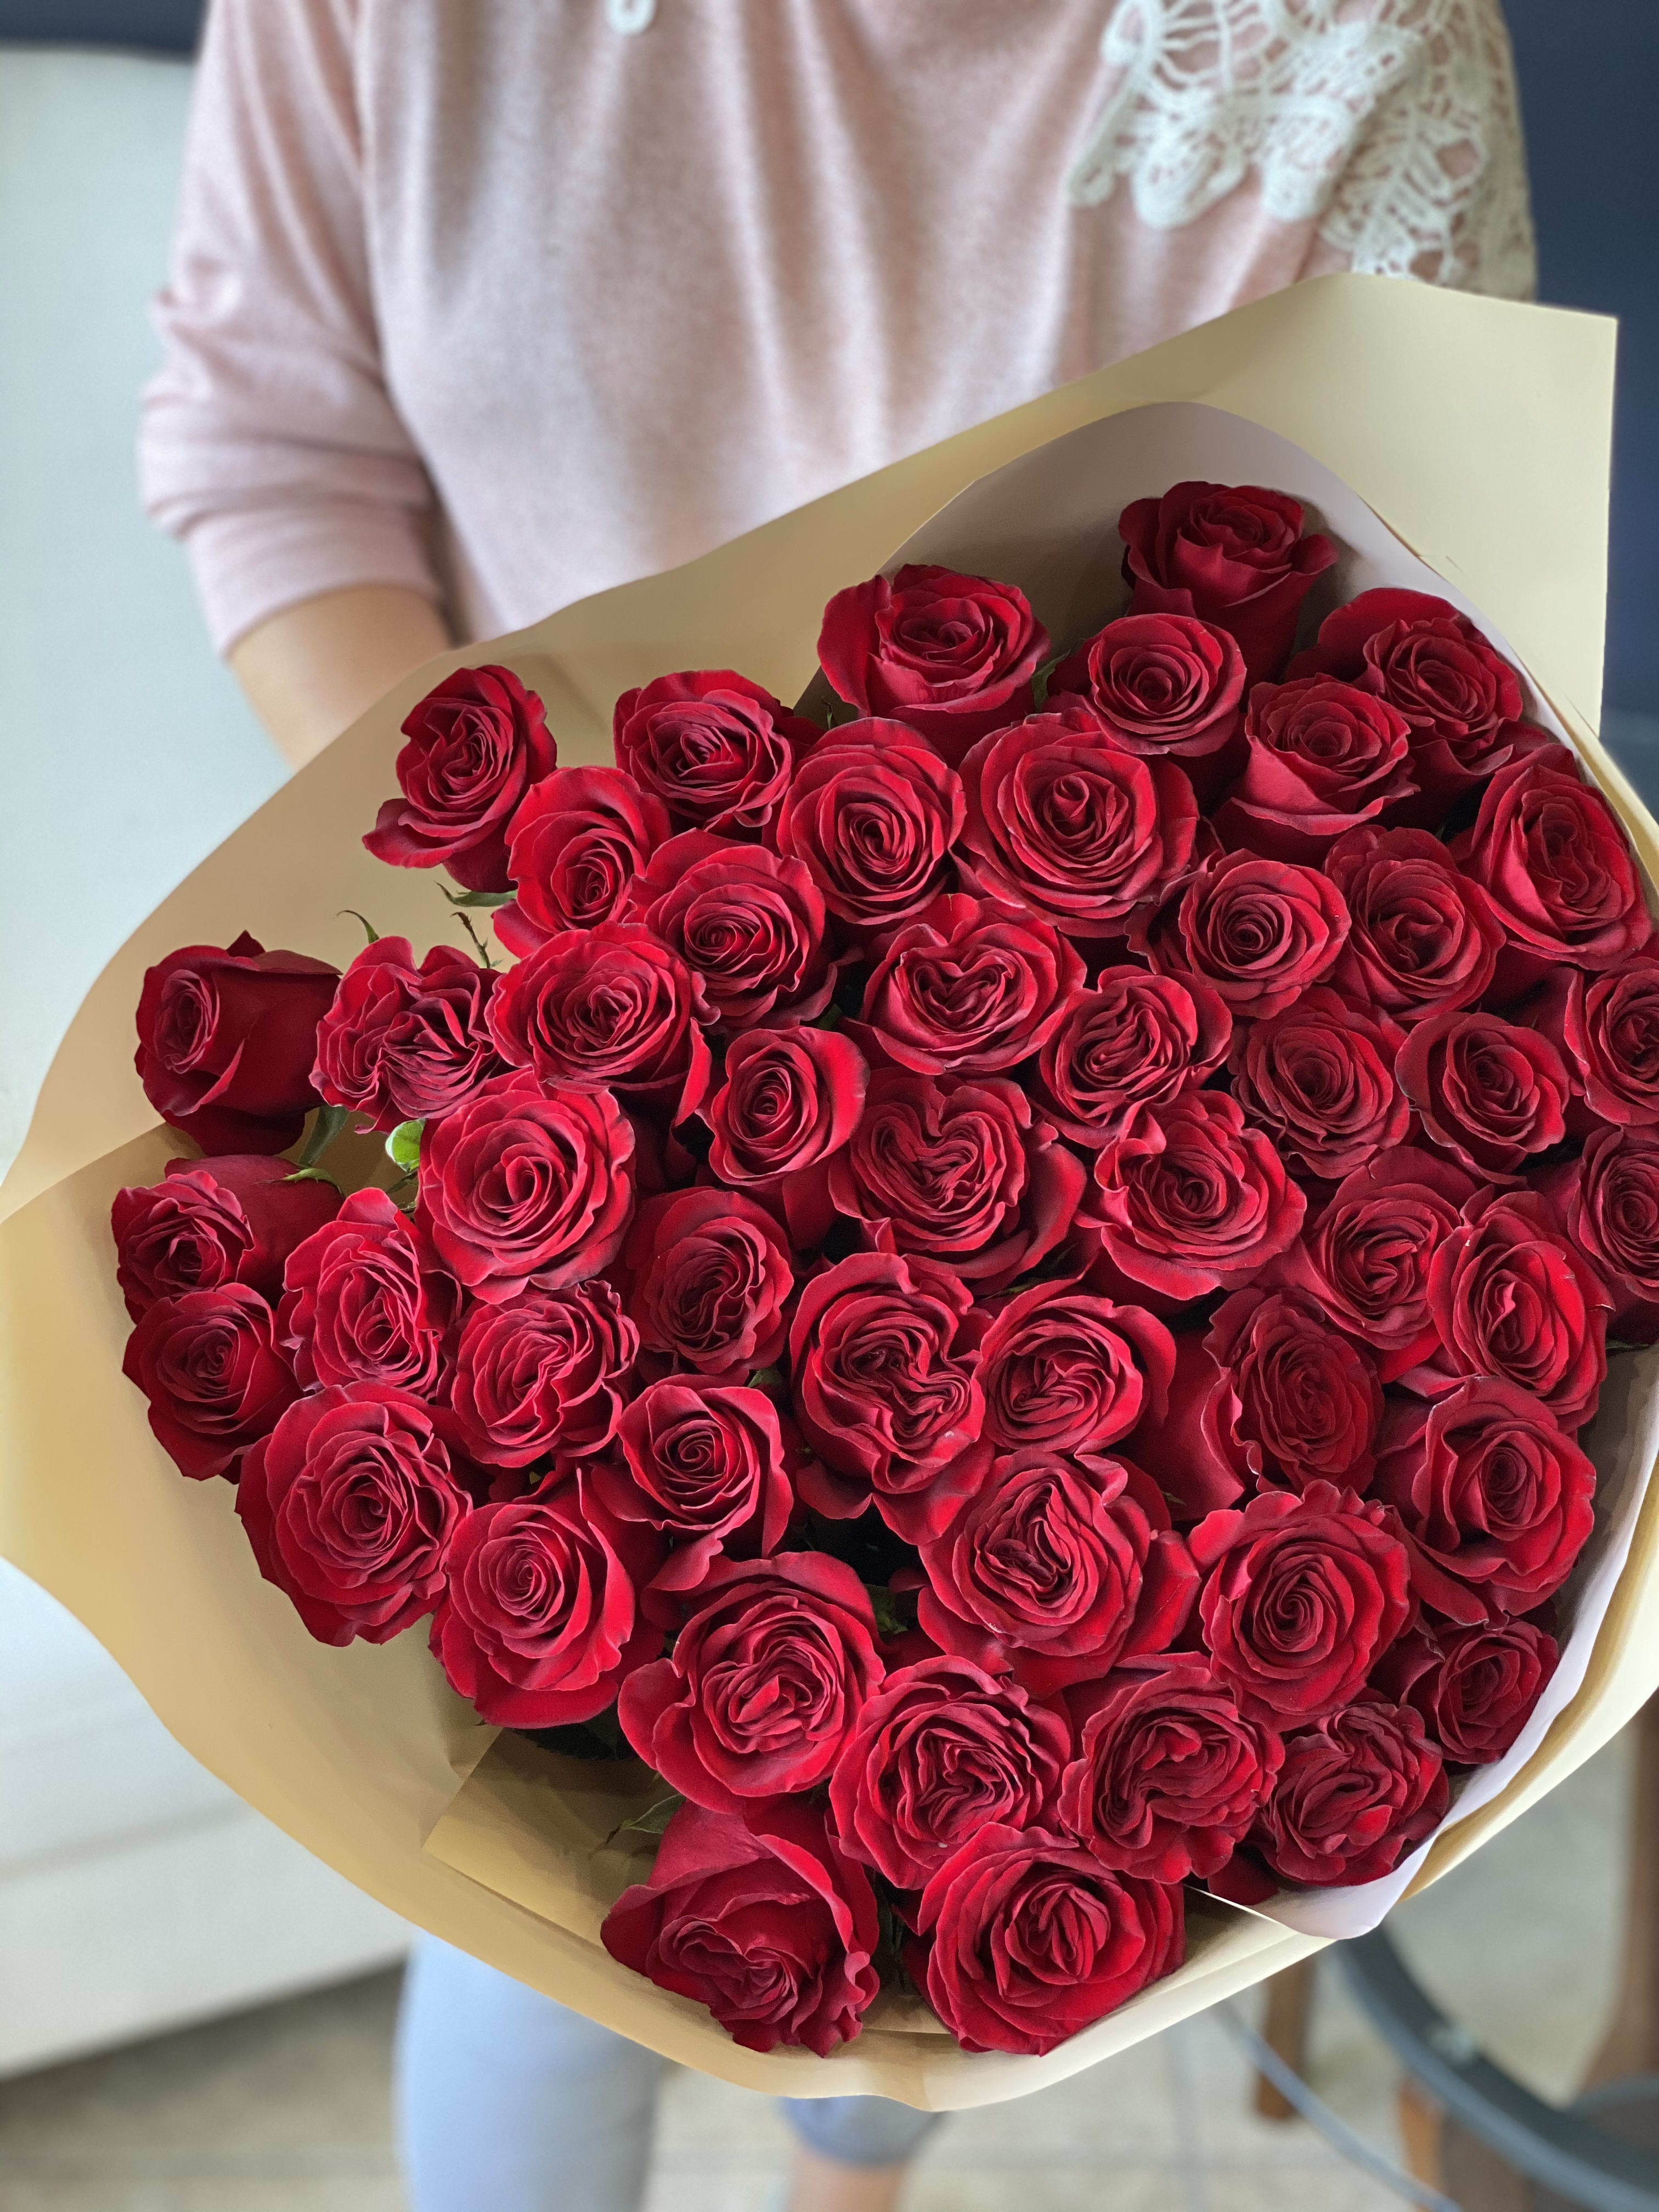 50 Red Roses Hand-crafted bouquet in Miami , FL | Luxury Flowers Miami